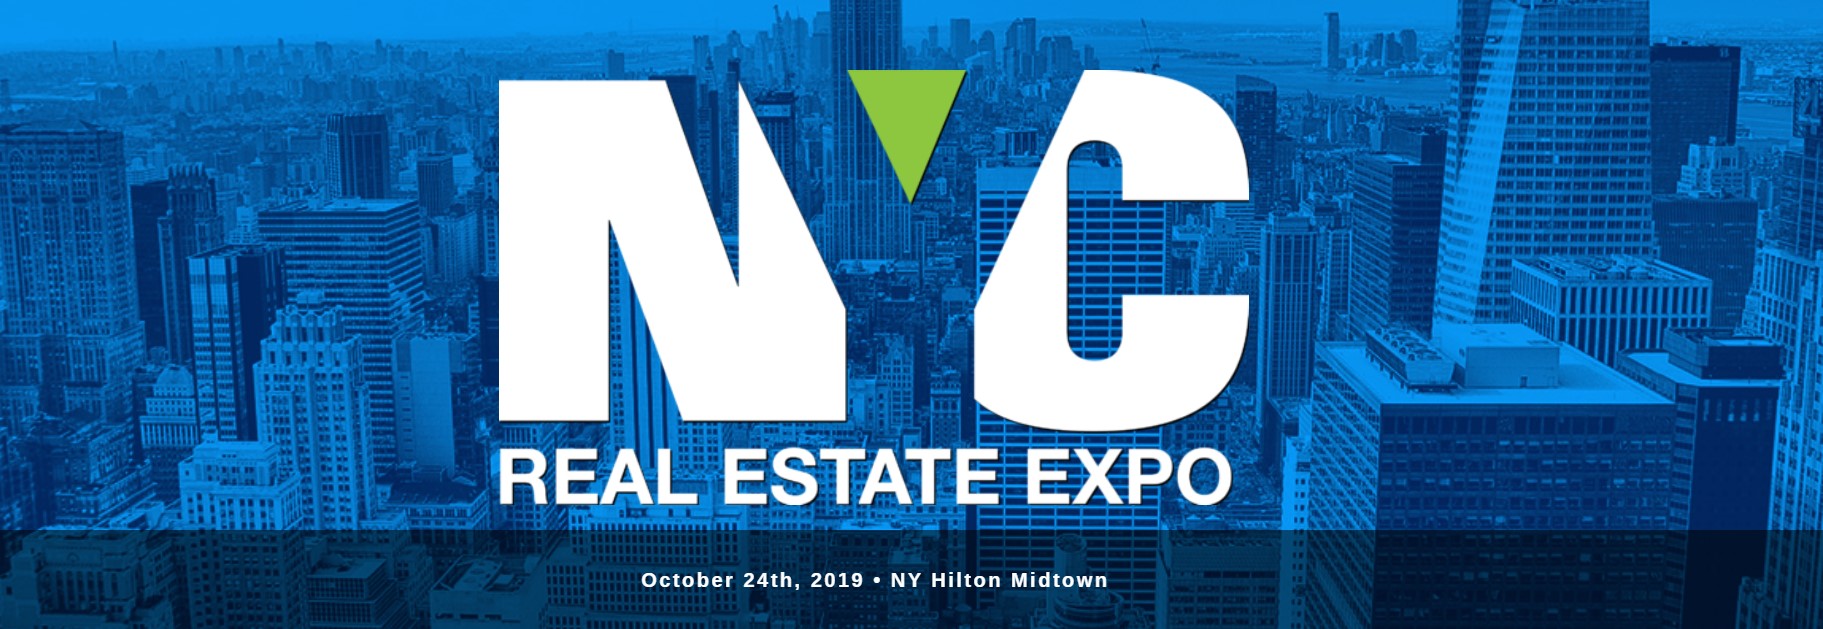 buildee Speaking and Exhibiting at NYC Real Estate Expo on 10/24/19